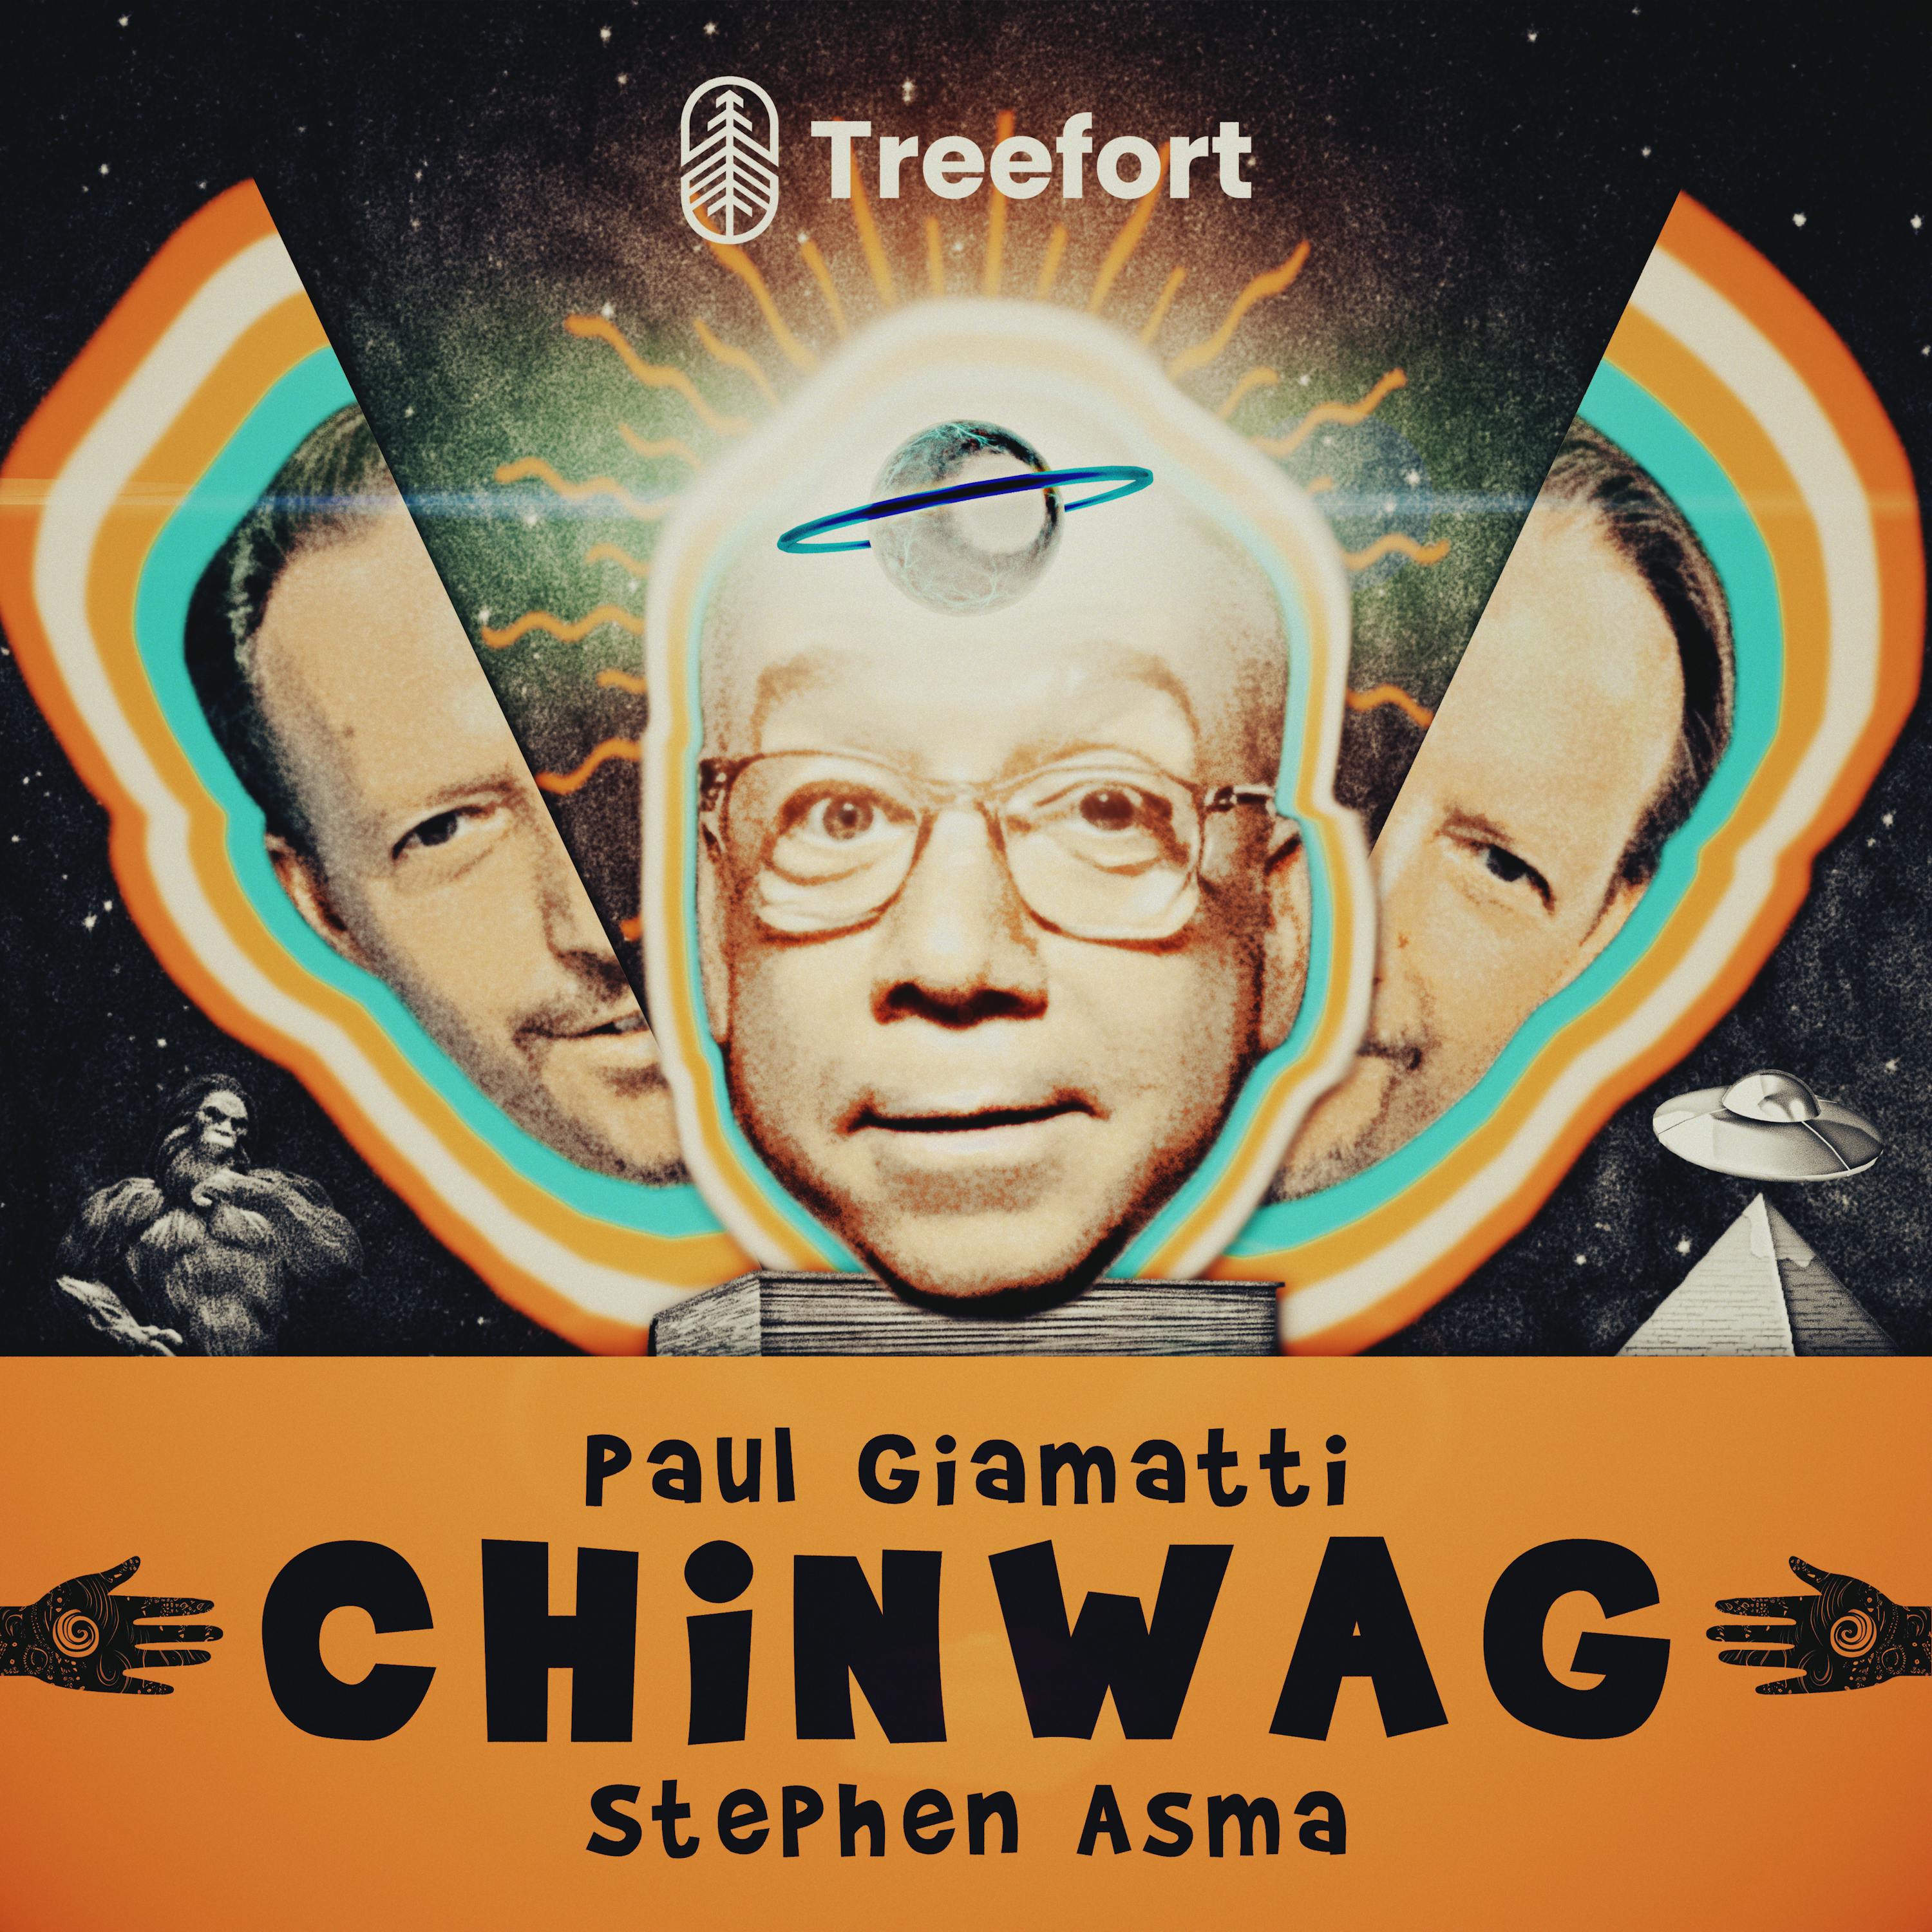 Paul Giamatti’s CHINWAG with Stephen Asma by Treefort Media & Touchy Feely Films